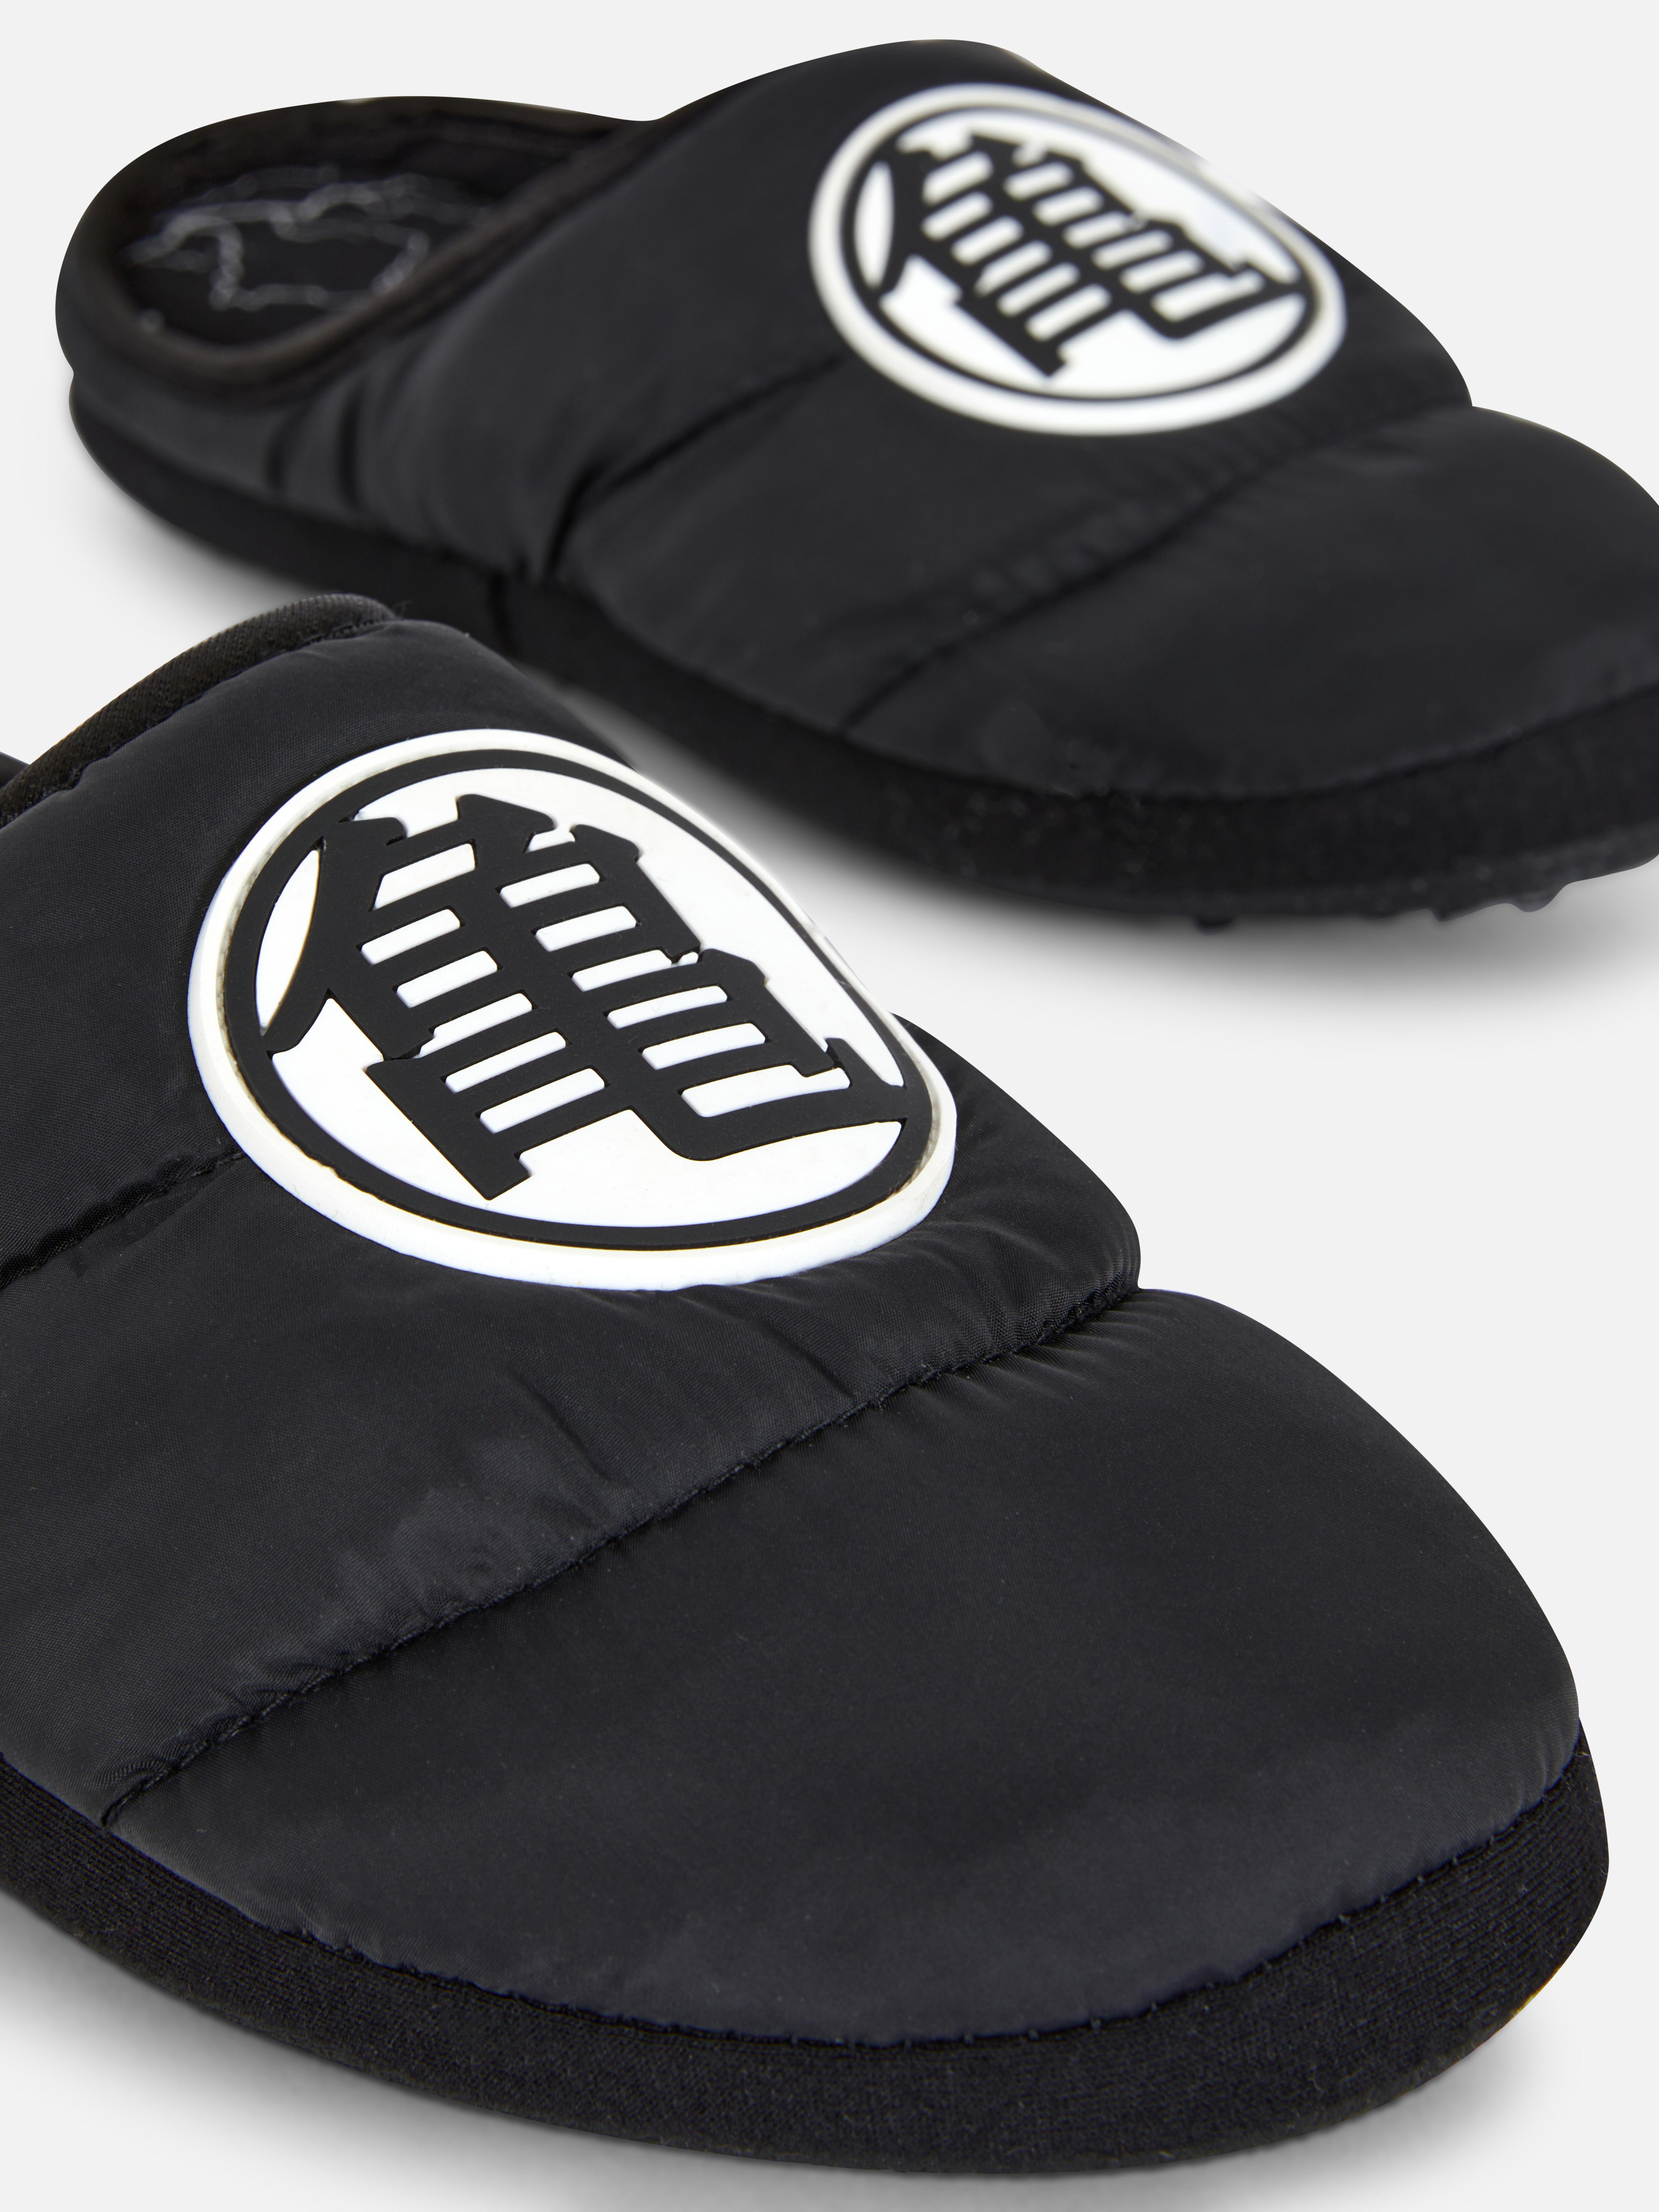 Dragon Ball Z Quilted Slippers